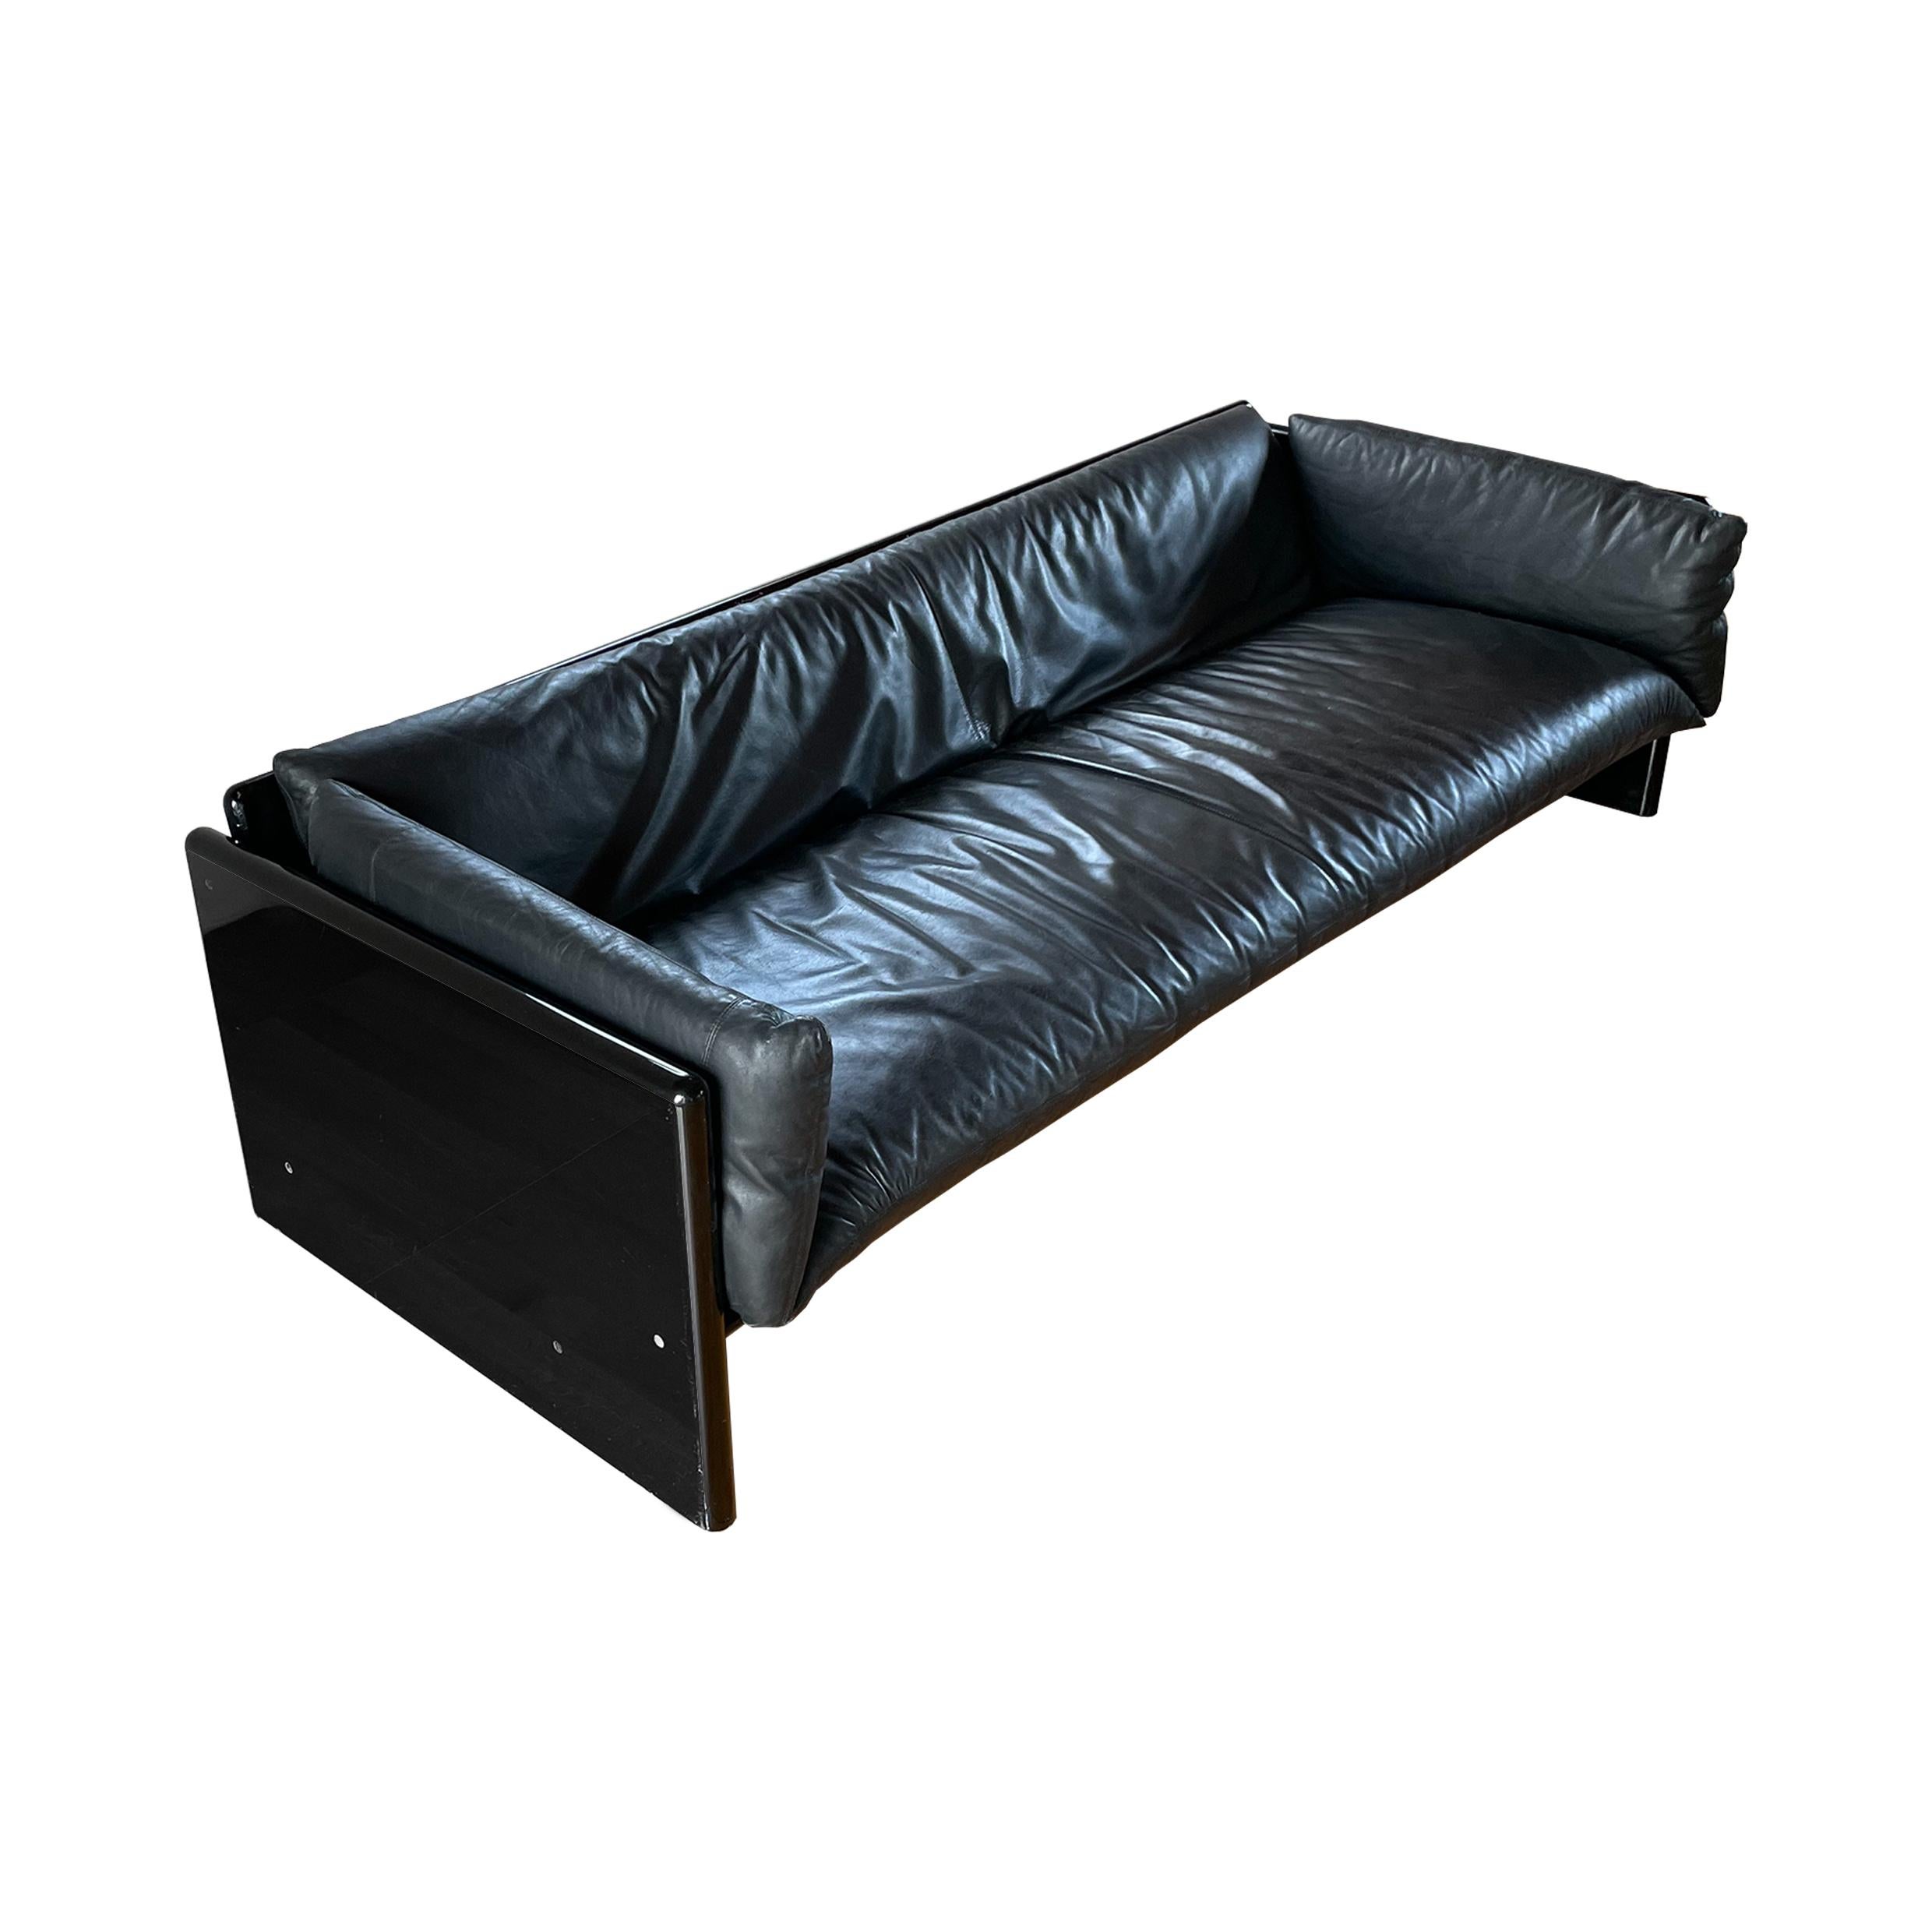 Three-seater “Simone” sofa, designed and manufactured by Studio Simon in 1975.

The structure is made of black lacquered wood. A black leather big seat completes the sofa.

The minimal lines recall Kazuhide Takahama's Japanese style.

Good